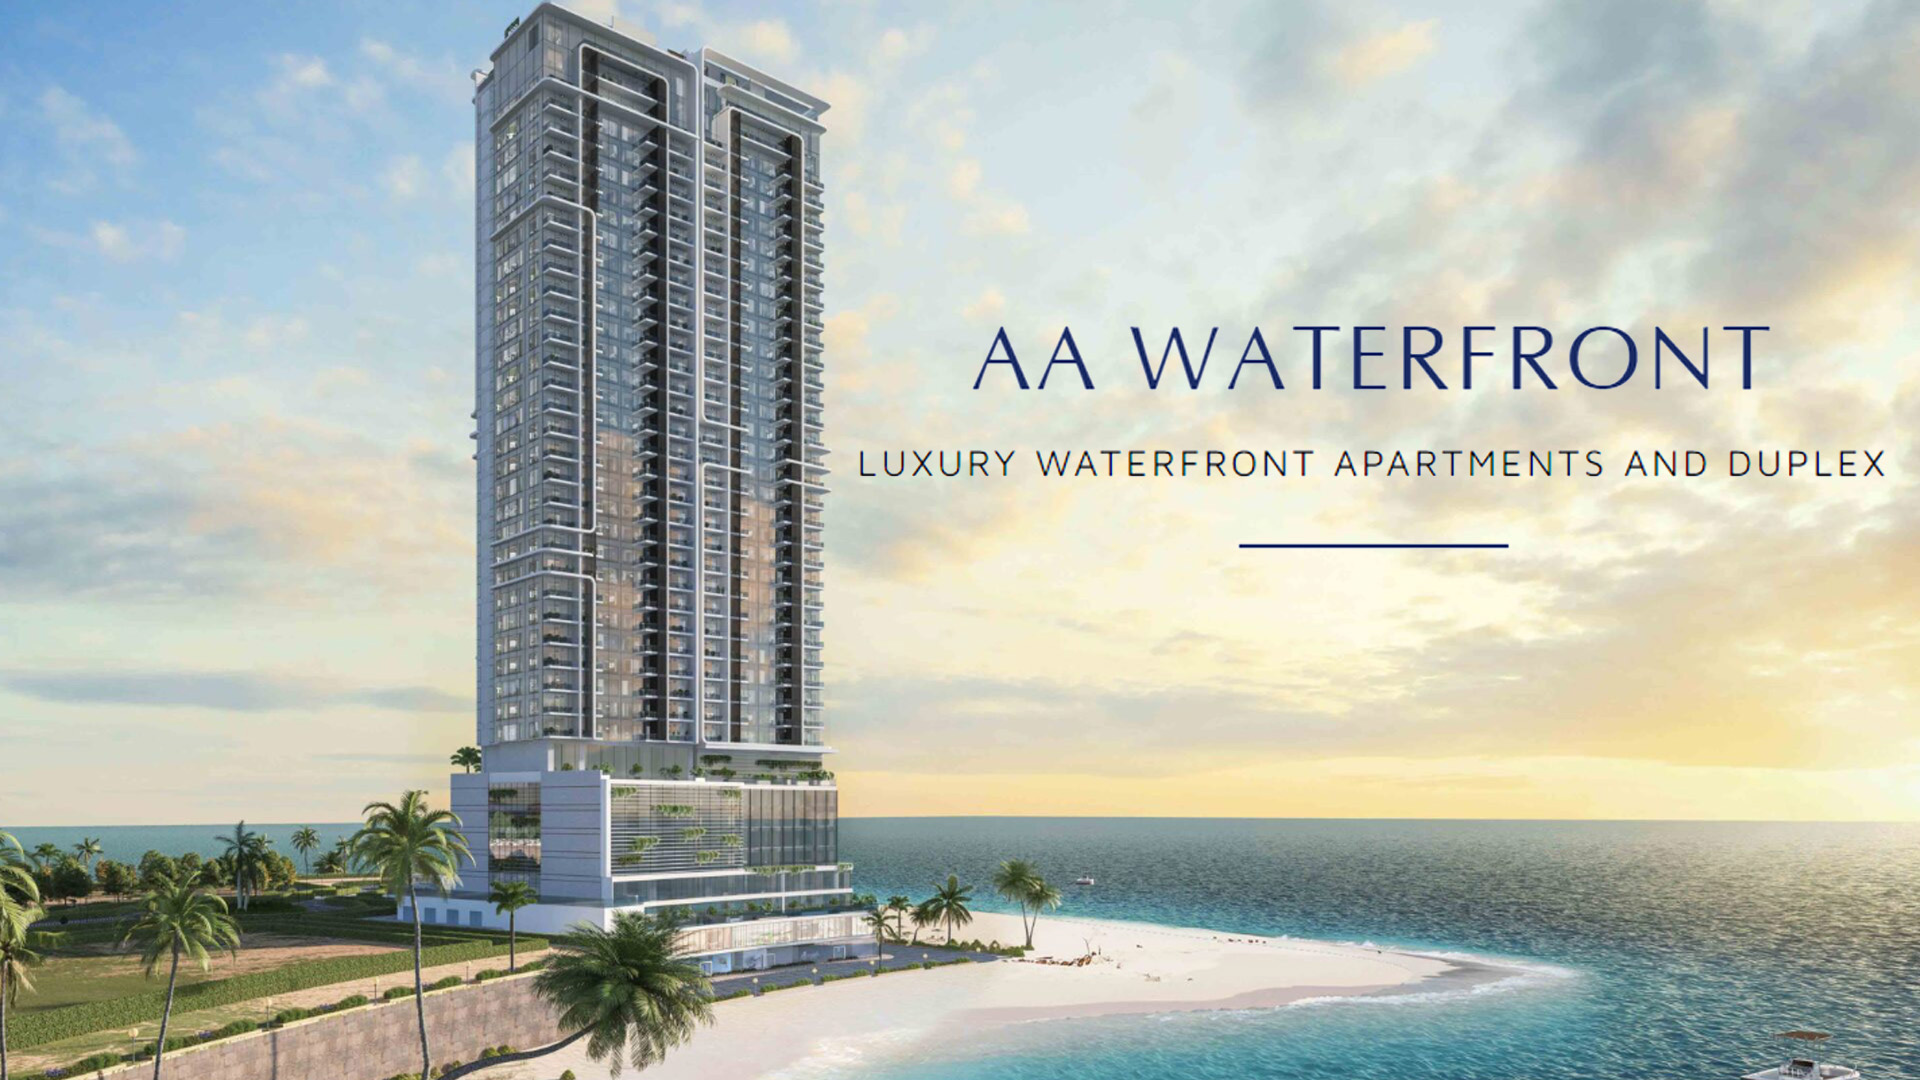 Invest in AA Waterfront Luxury Real Estate